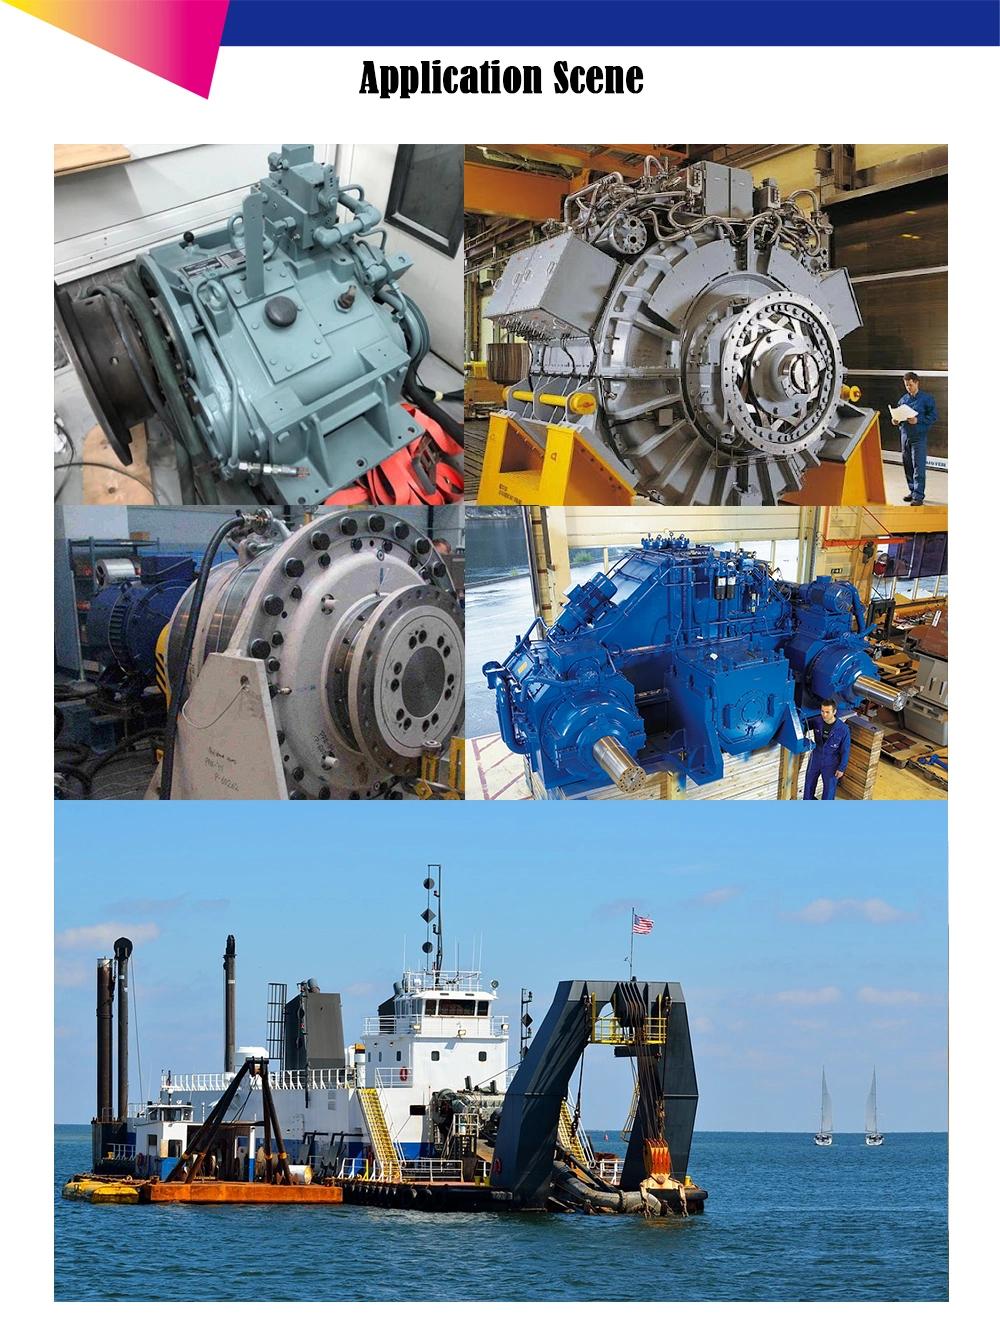 Marine Gearbox Pumps Distribution Gearboxes Hydraulic Power Pack Gearbox Gear Box Marine Gear Box Worm Gearbox